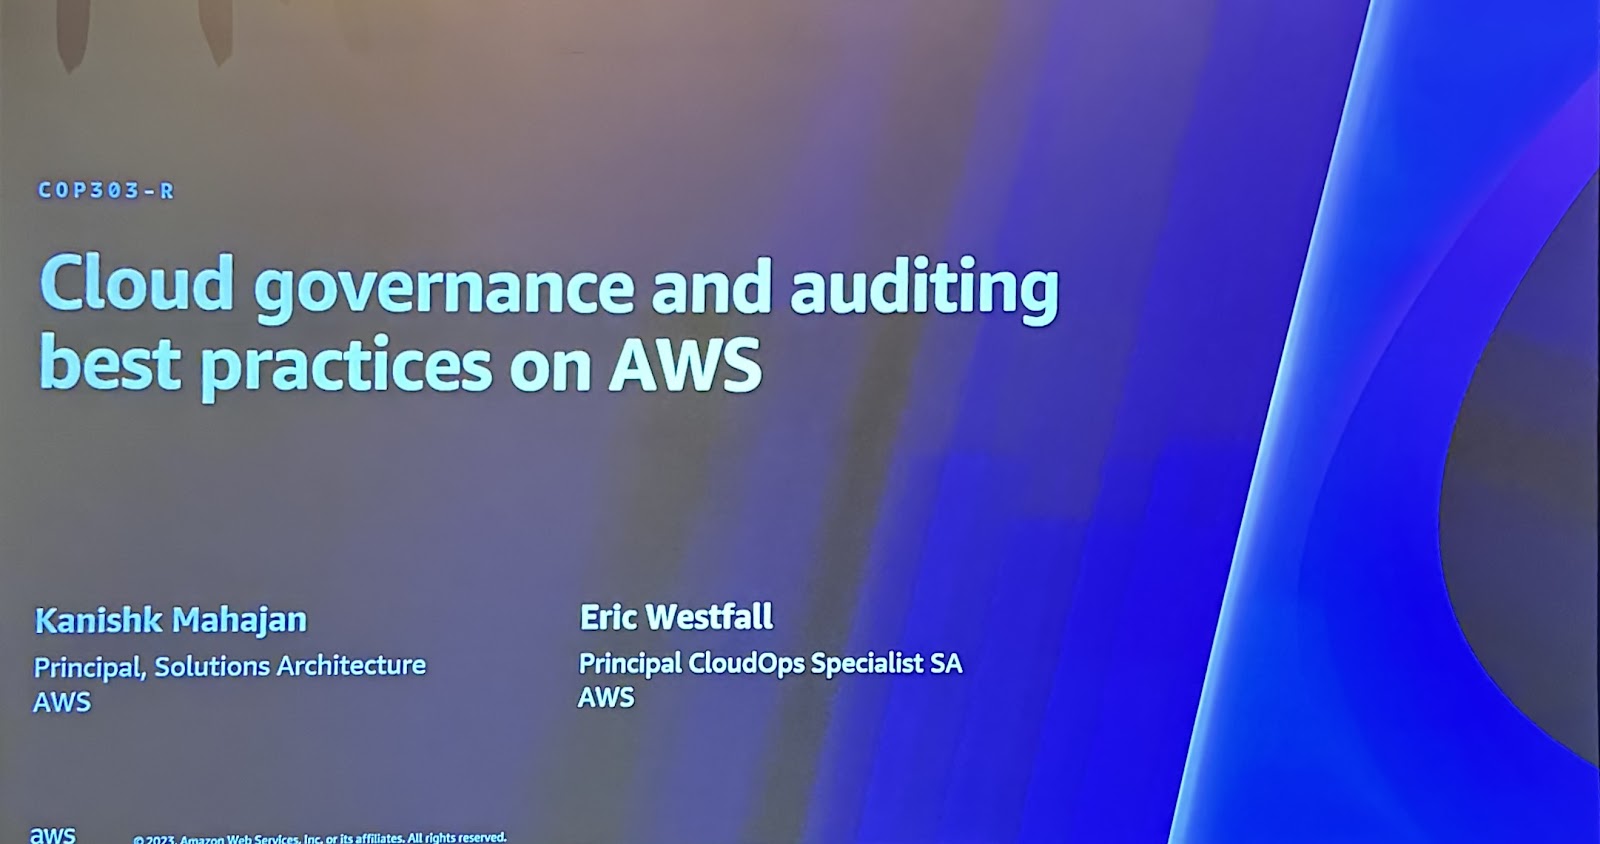 Cloud governance and auditing best practices on AWS